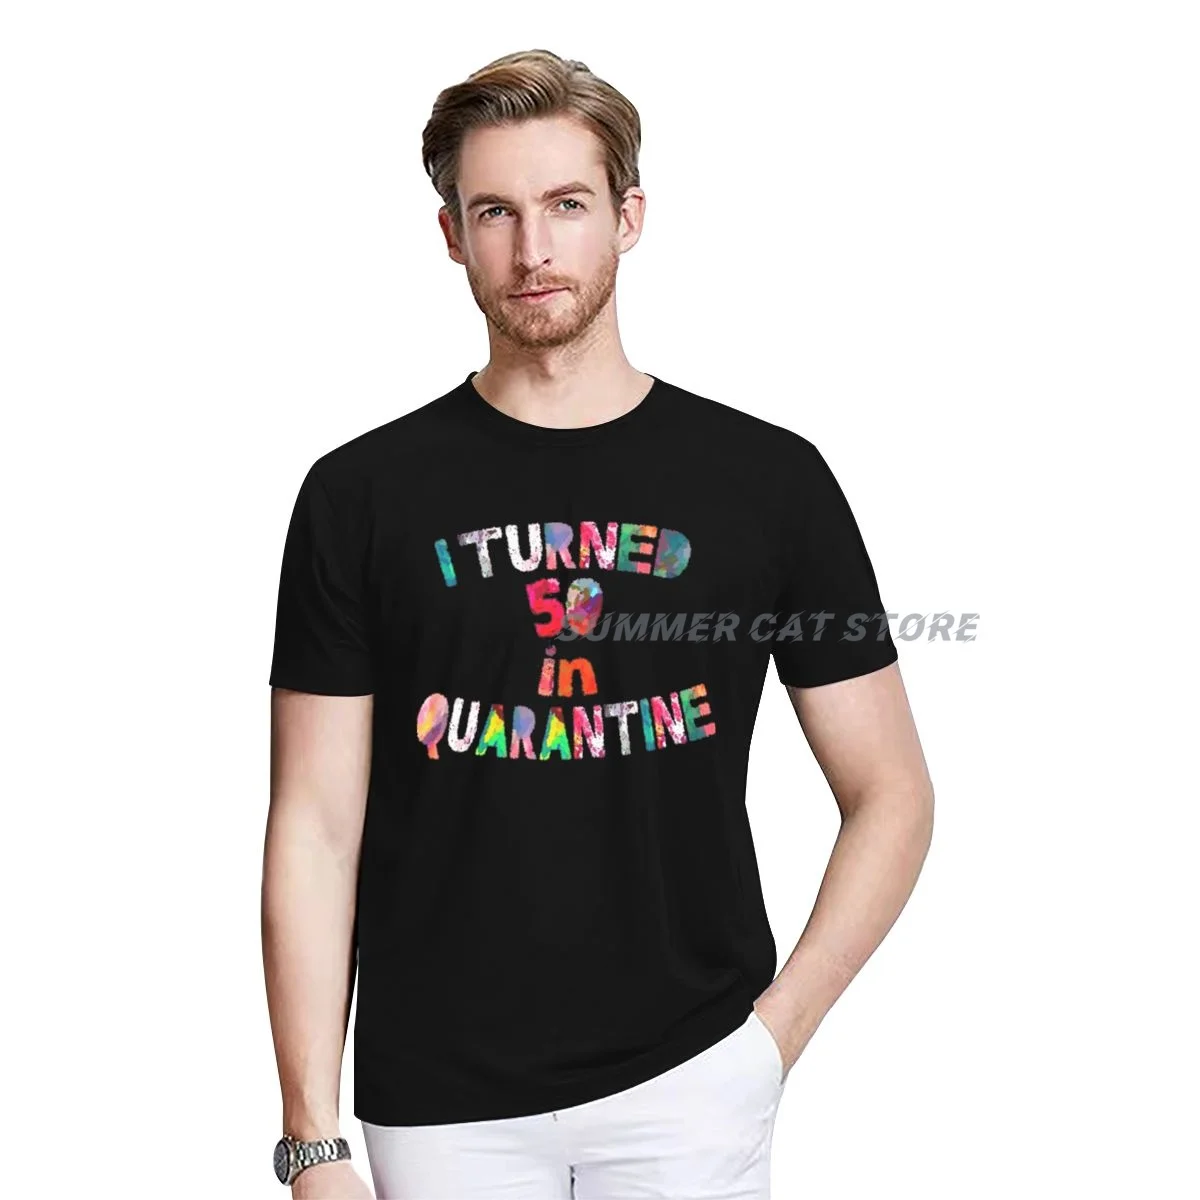 

I Turned 50 In Quarantine Funny Idea For Birthday T-Shirt Party Graphic Tee Tops Aesthetic Clothes for Women Men